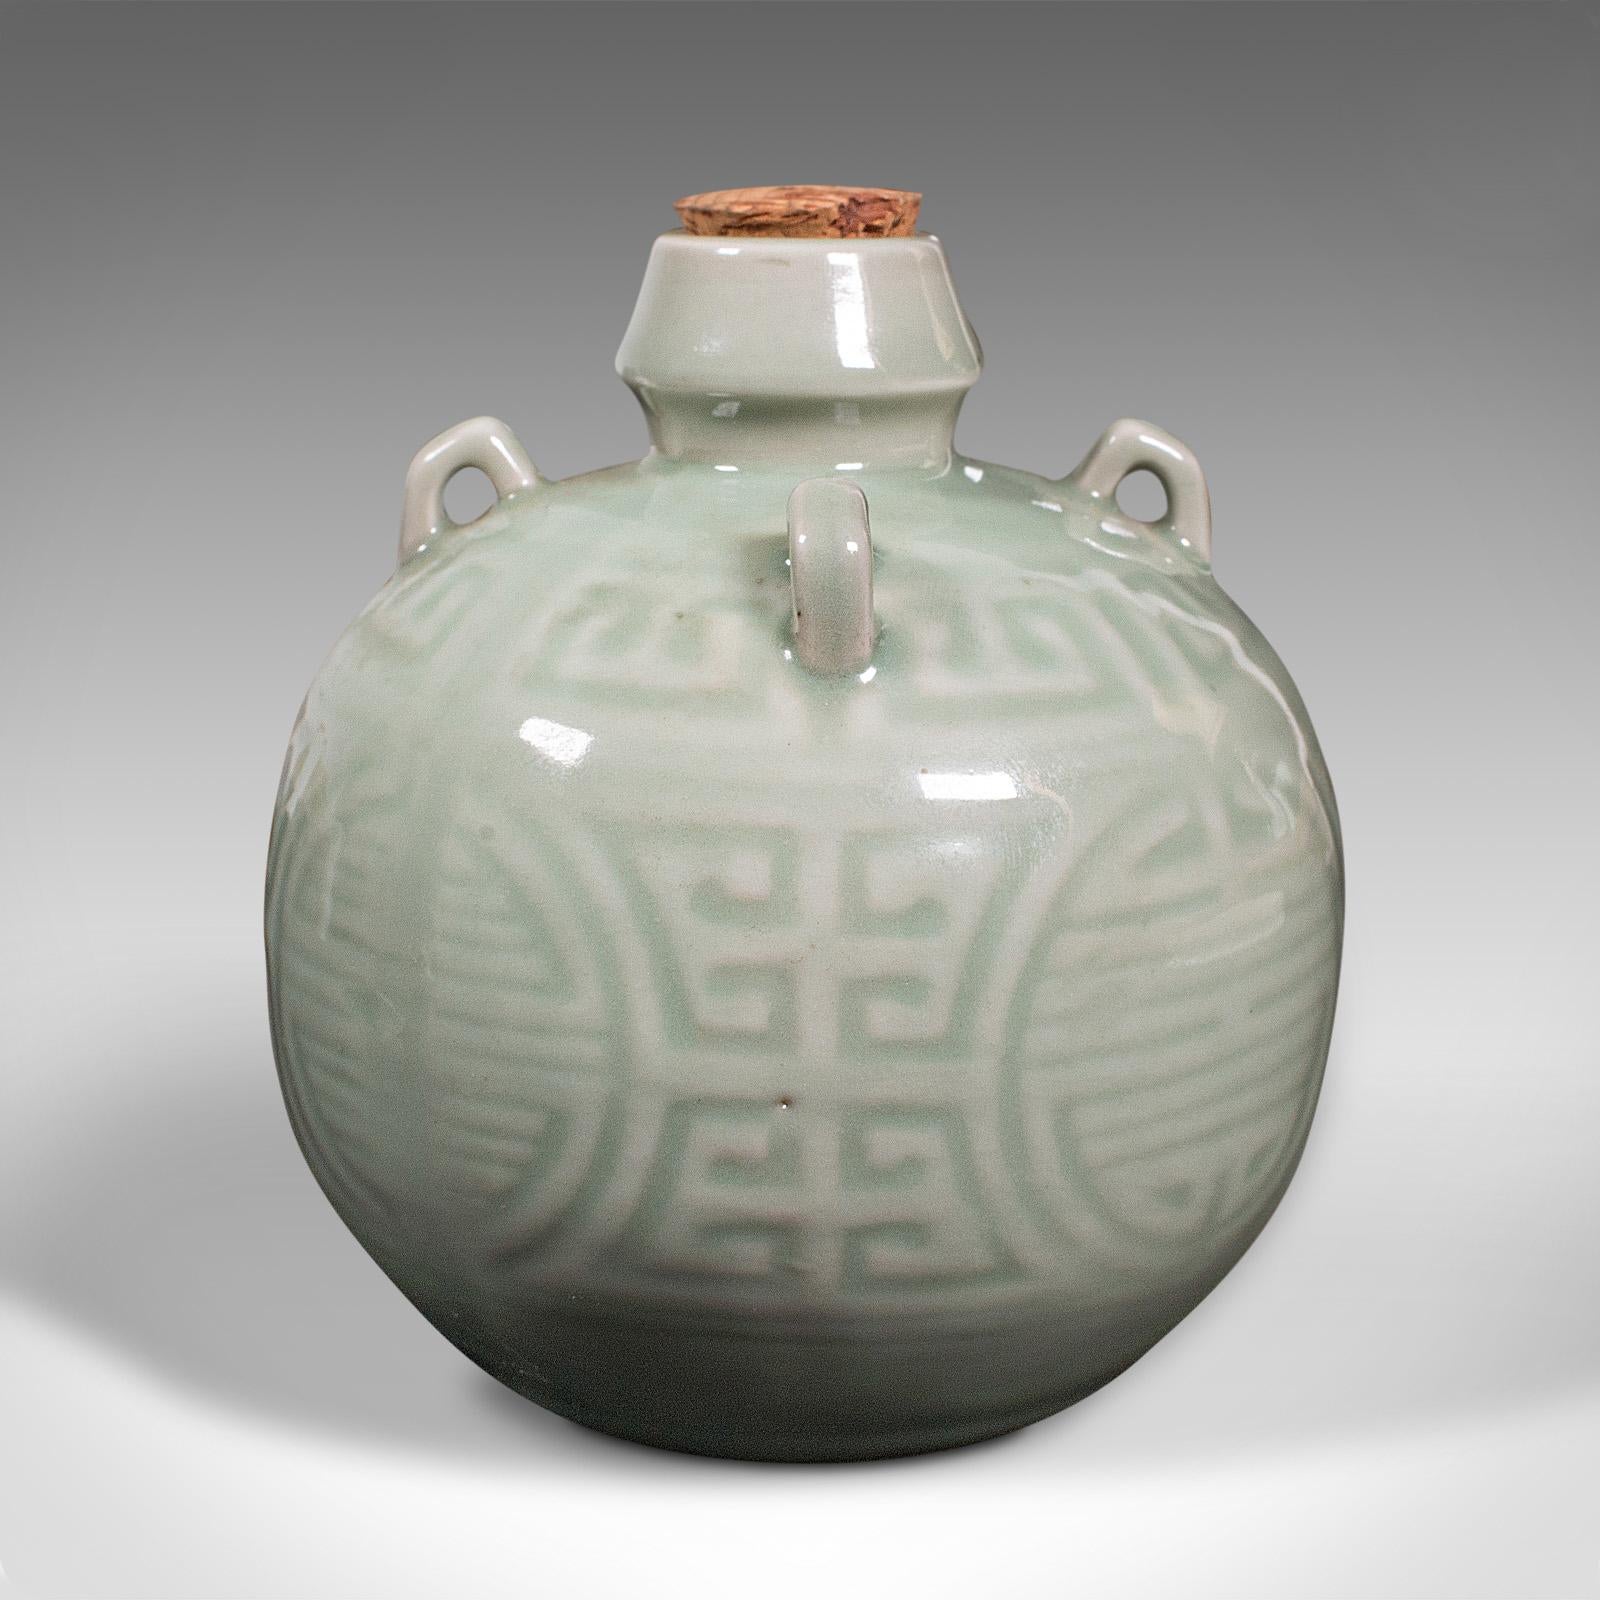 This is an antique spirit pot. A Chinese, celadon ceramic gourd, dating to the late Victorian period circa 1900.

Fascinating globular form with appealing light green hues
Displays a desirable aged patina and in very good order
Glazed celadon